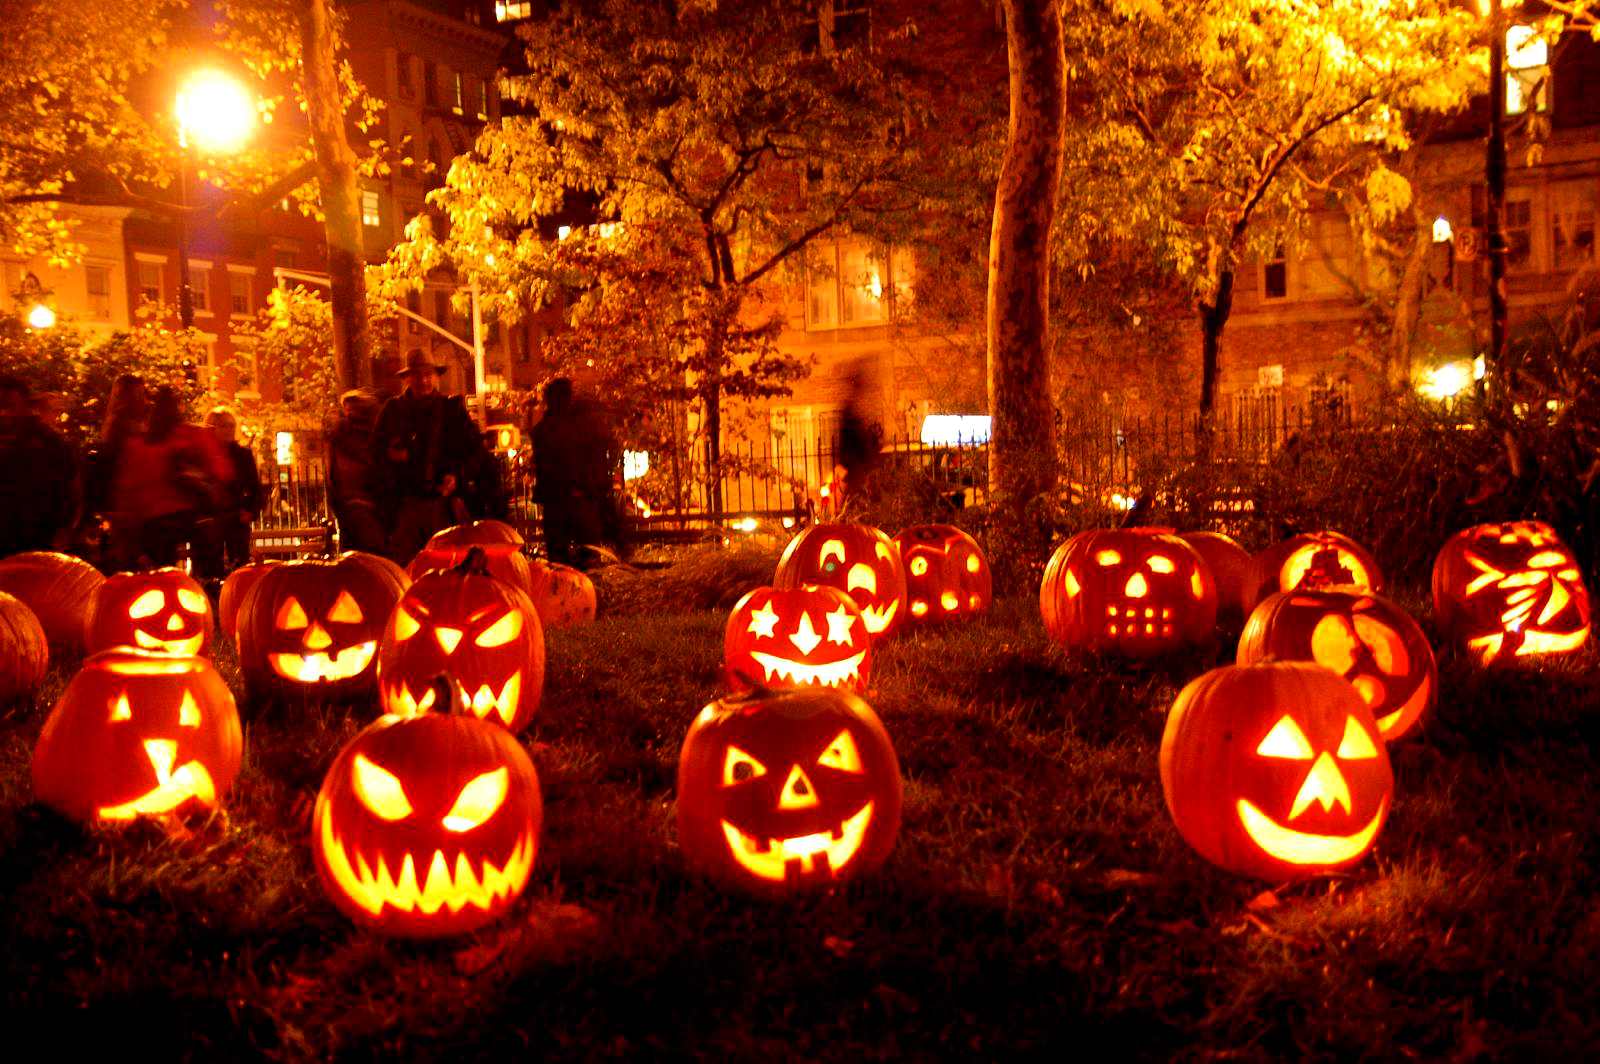 Create 21st Century Halloween Decorations with the help of LED lights!